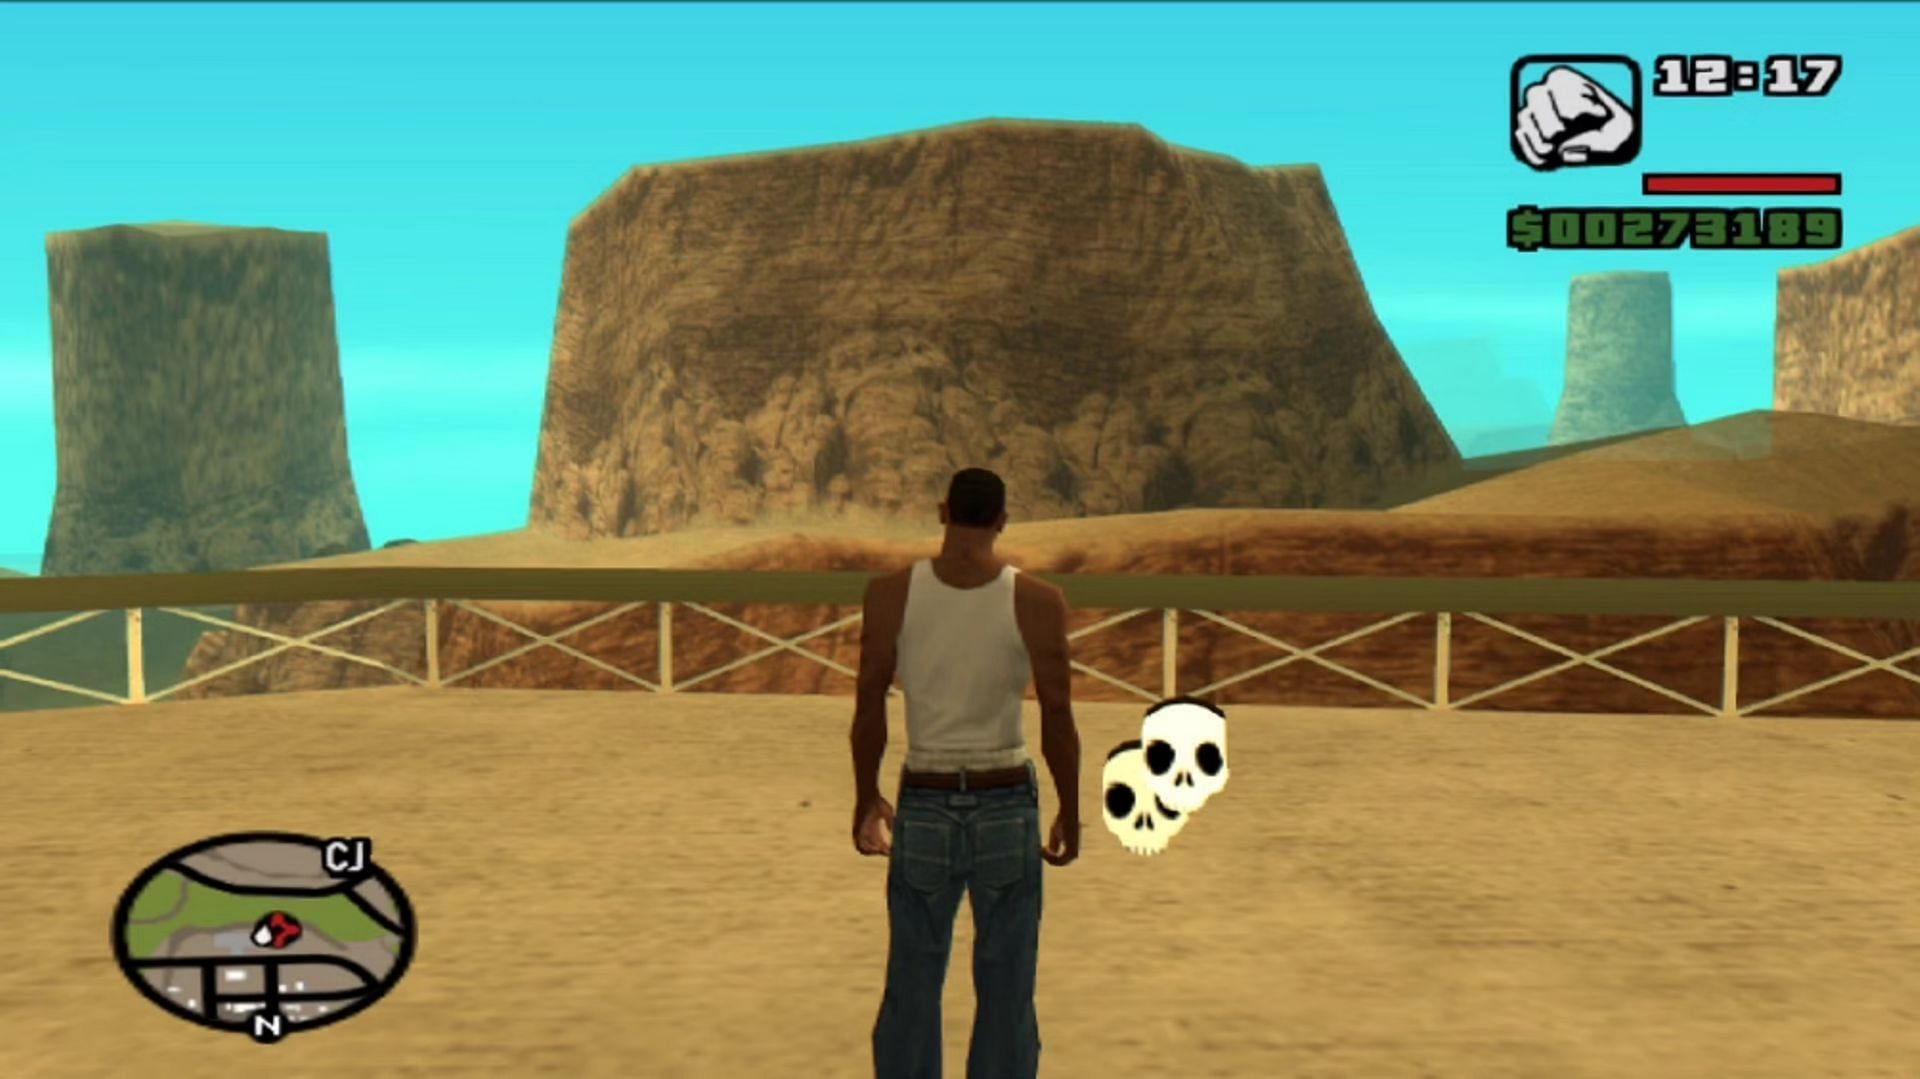 The two-skull marker that activates Rampage mode (Image via Rockstar Games)